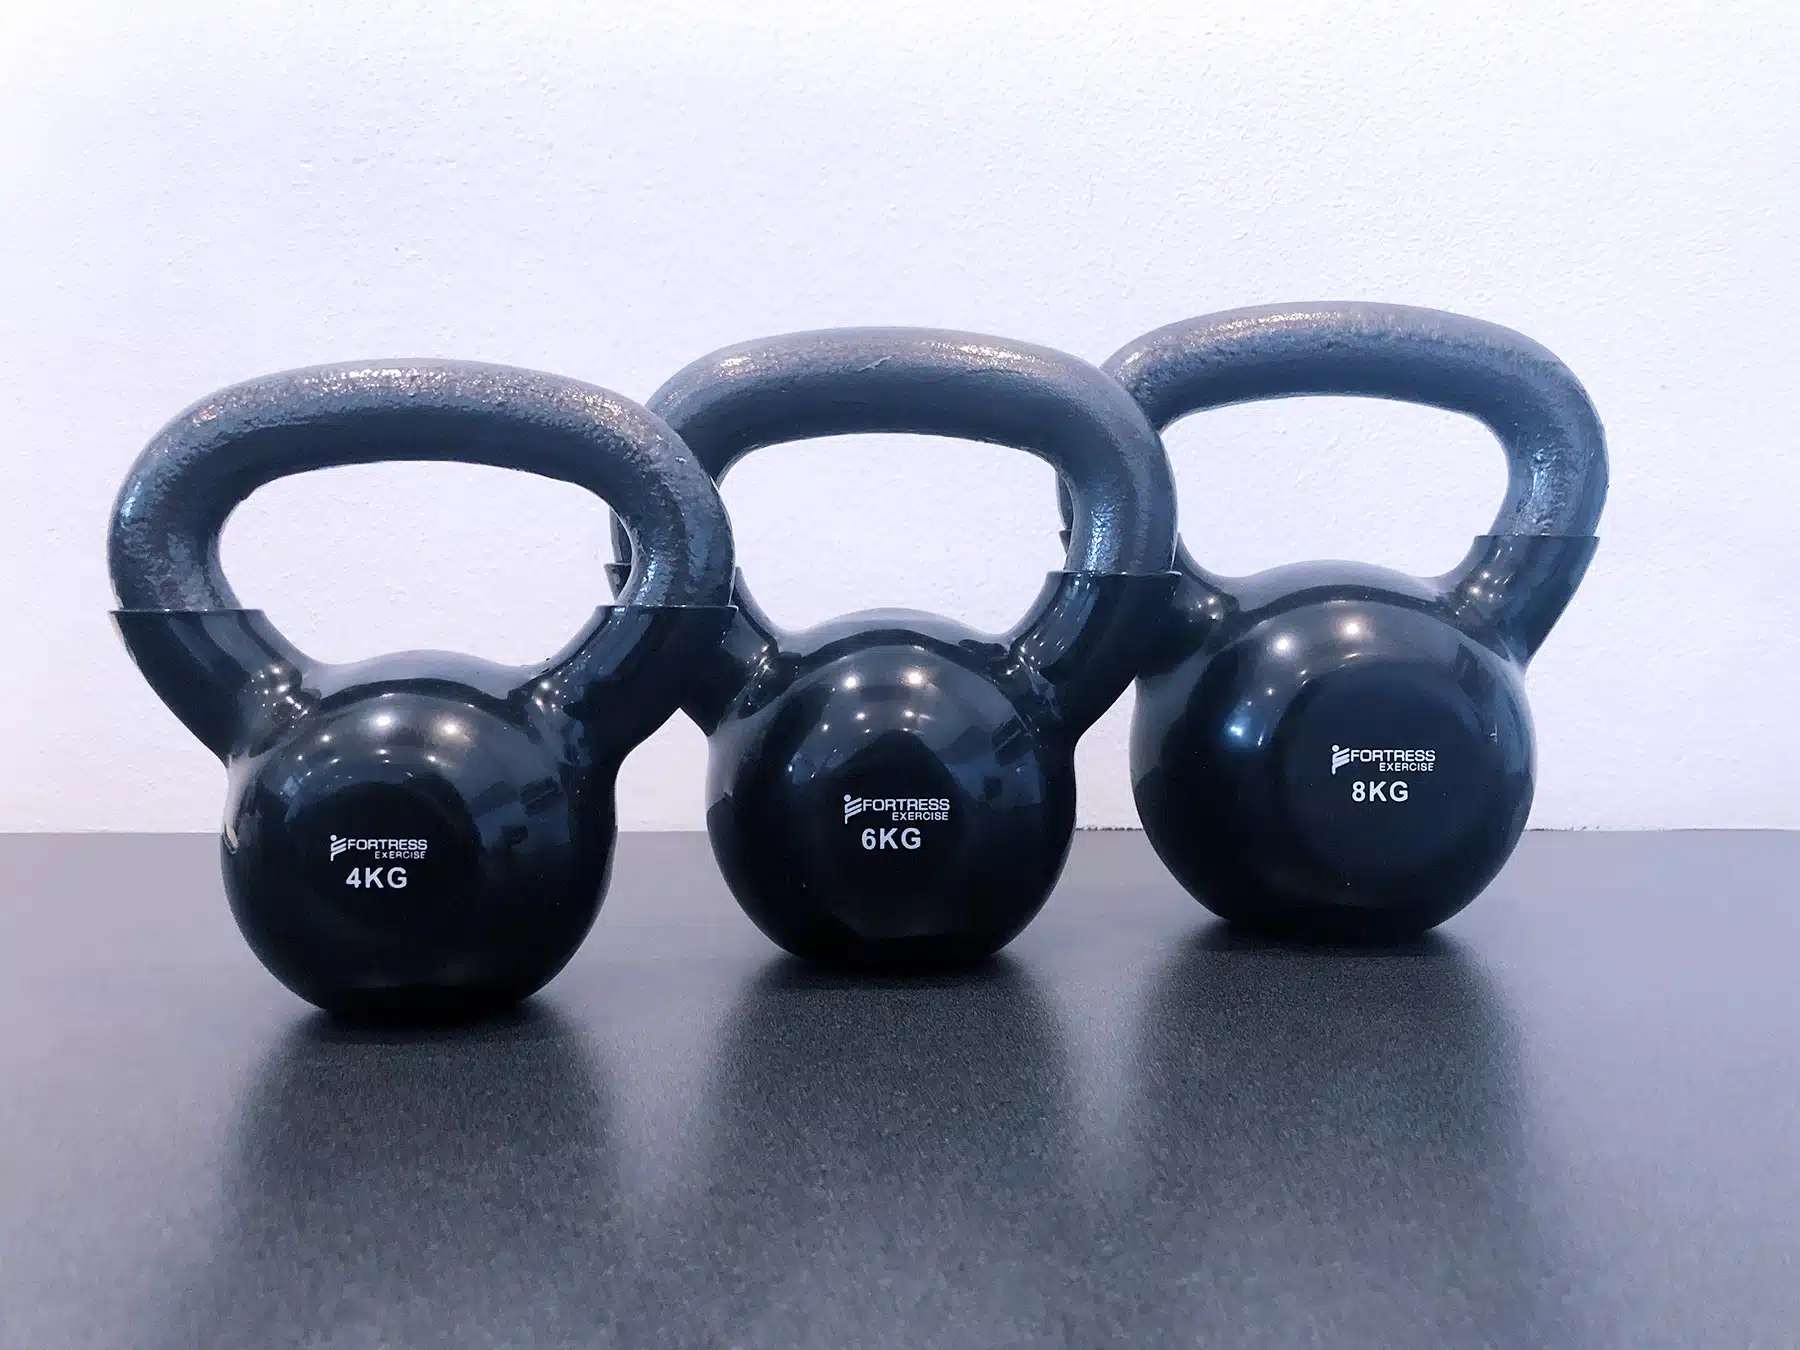 Kettlebell Exercises Benefits - Intensify workouts with kettlebells